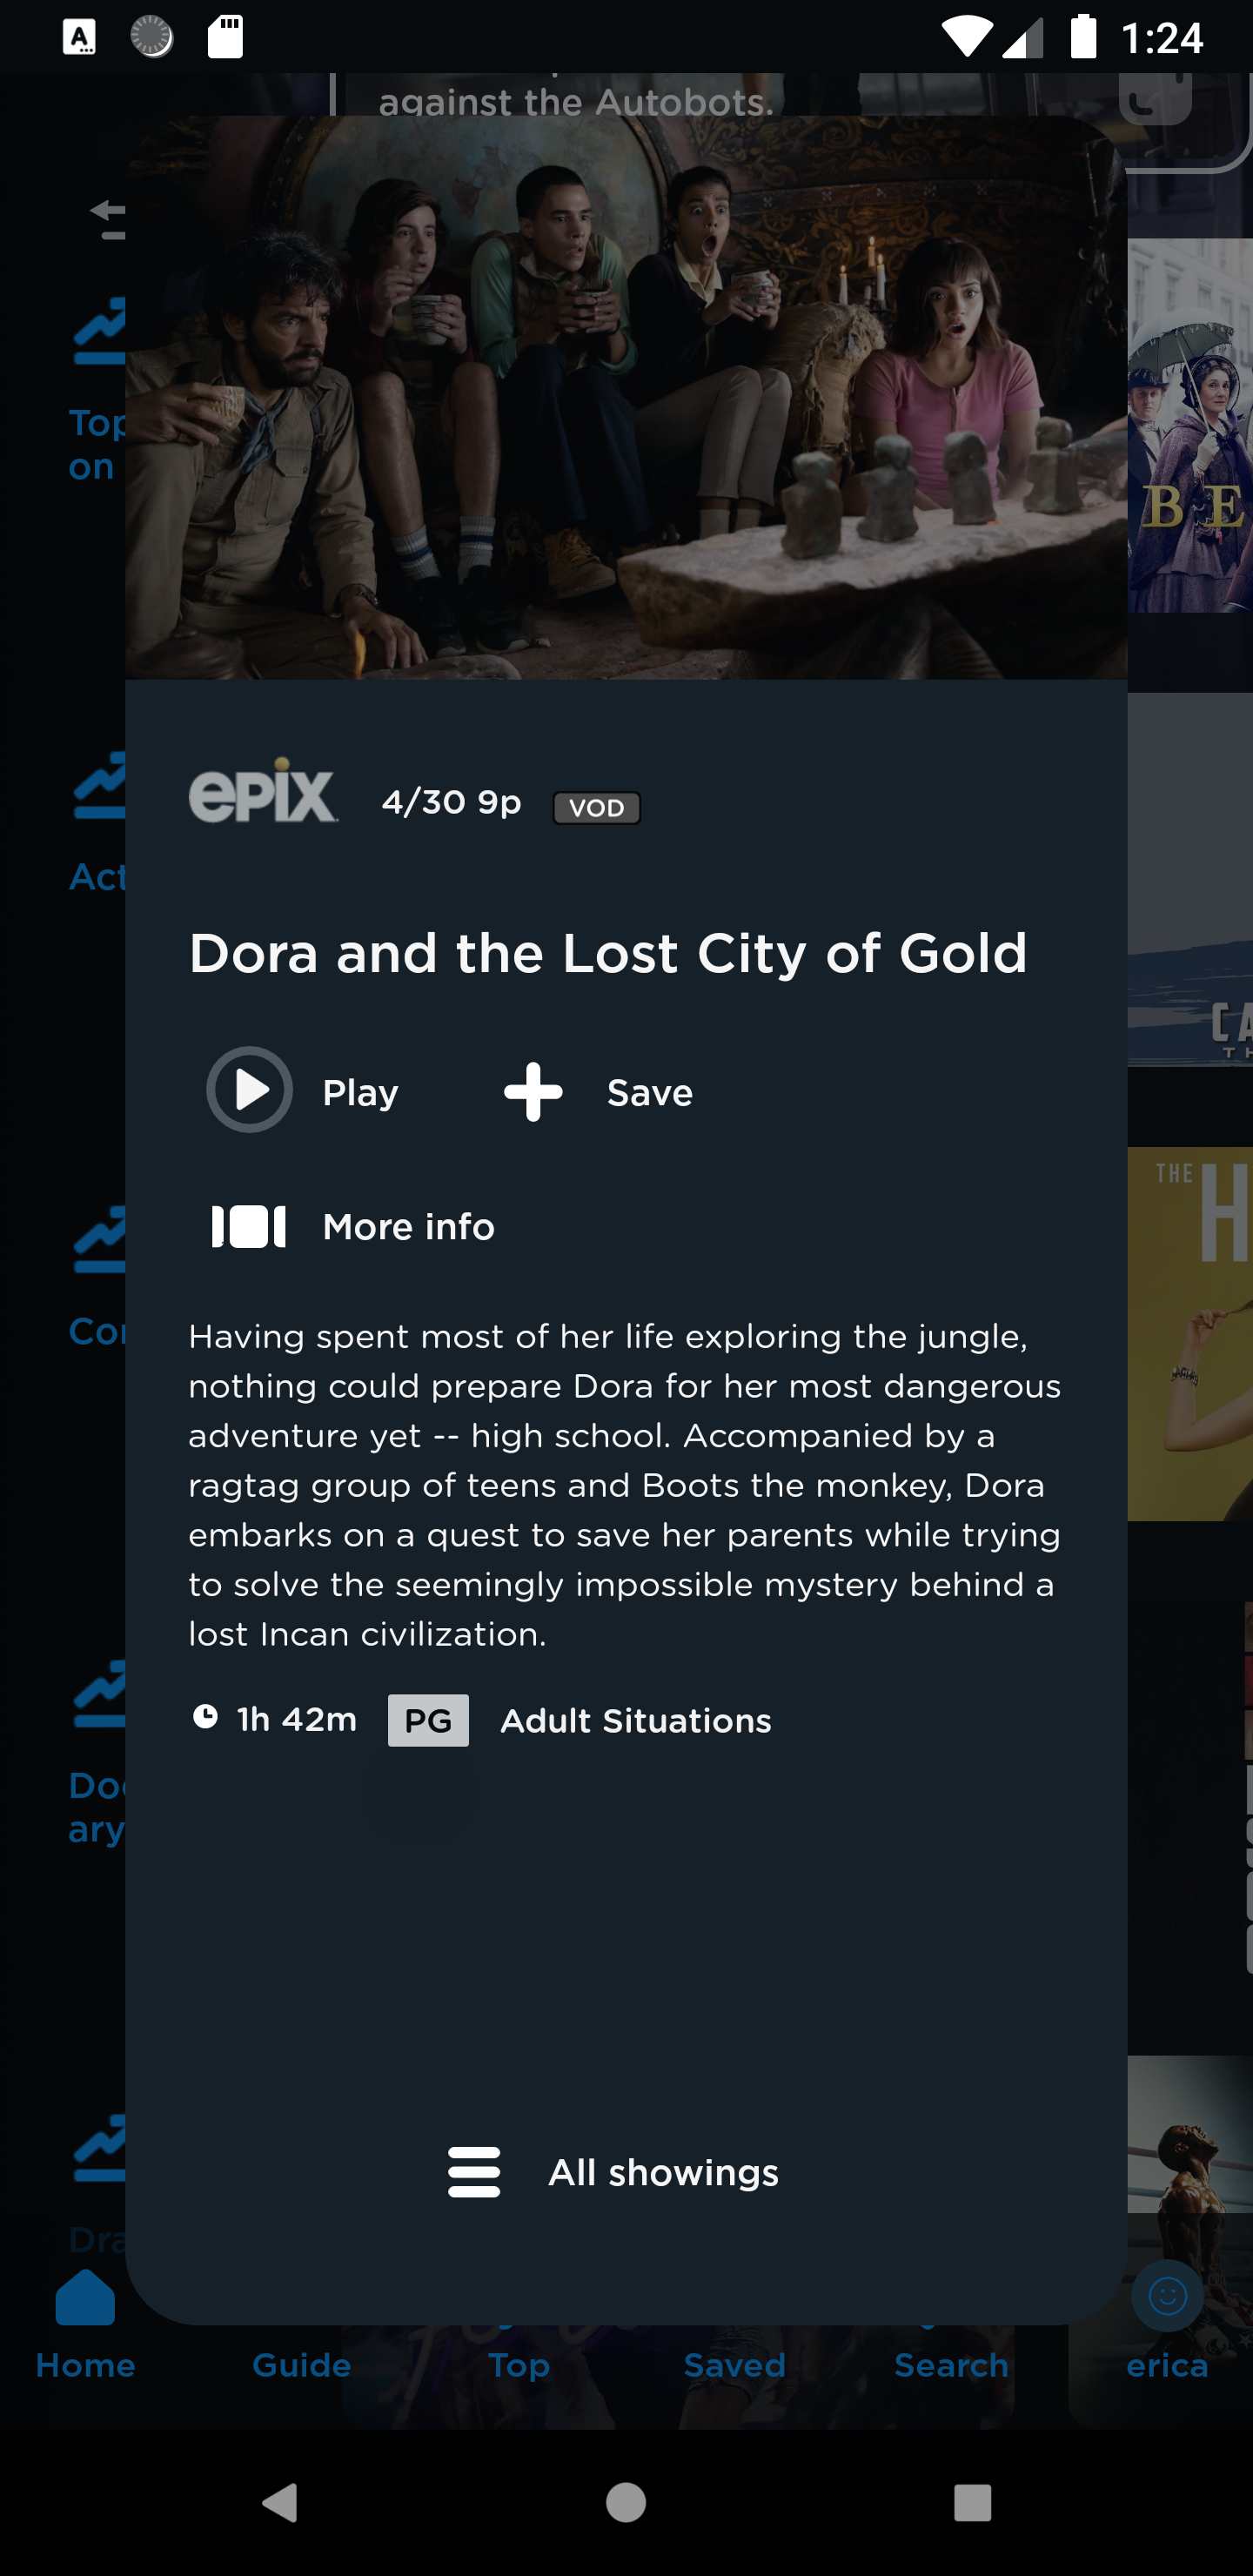 'Screenshot of Dora and the Lost City of Gold on EPIX, Android Mobile'